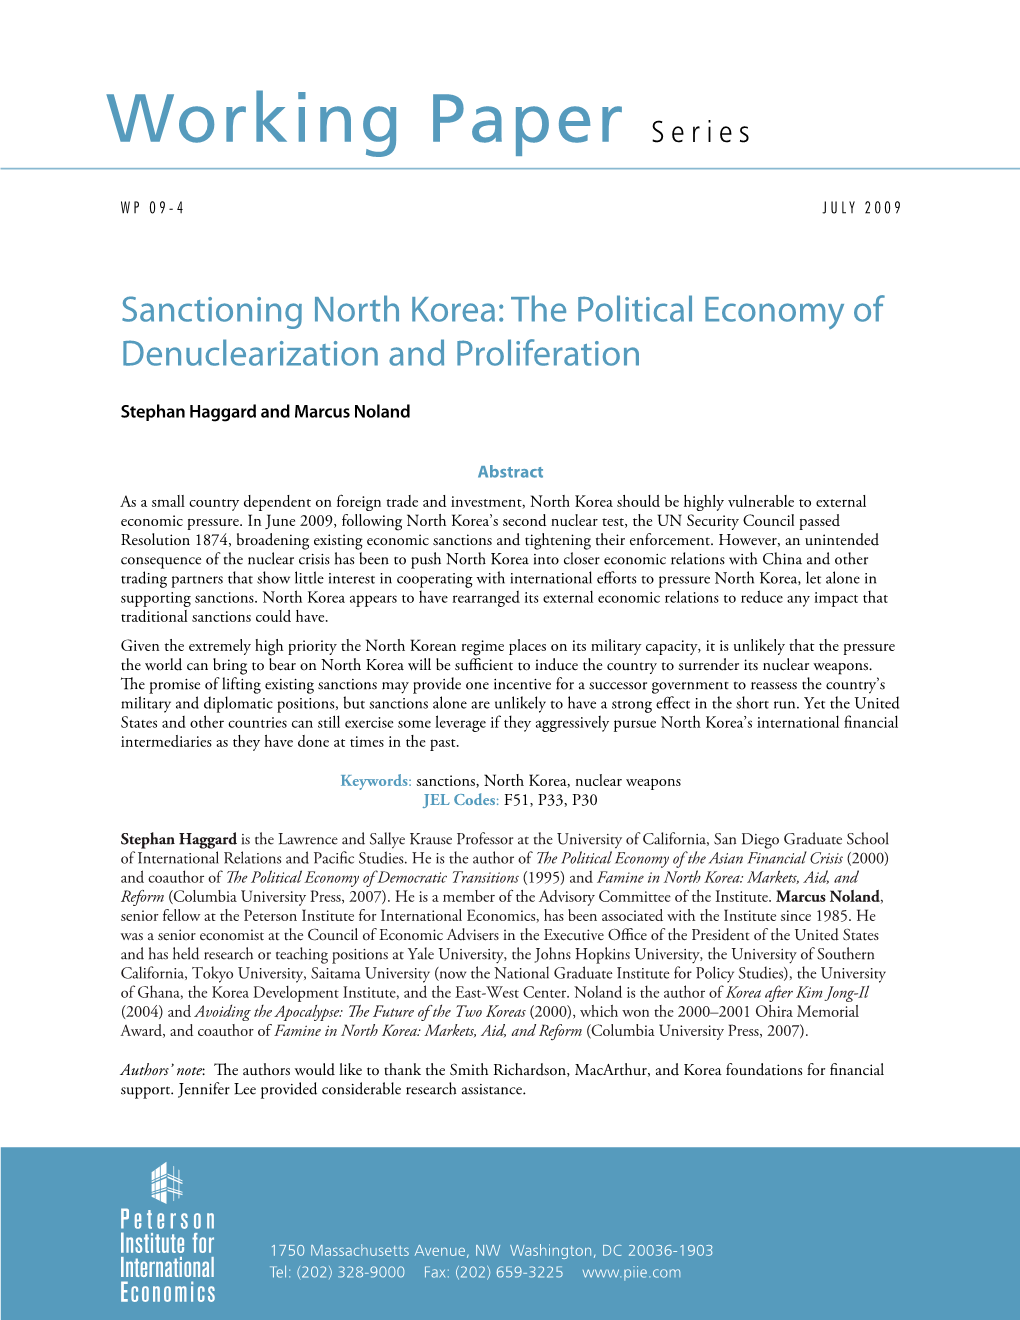 Sanctioning North Korea: the Political Economy of Denuclearization and Proliferation